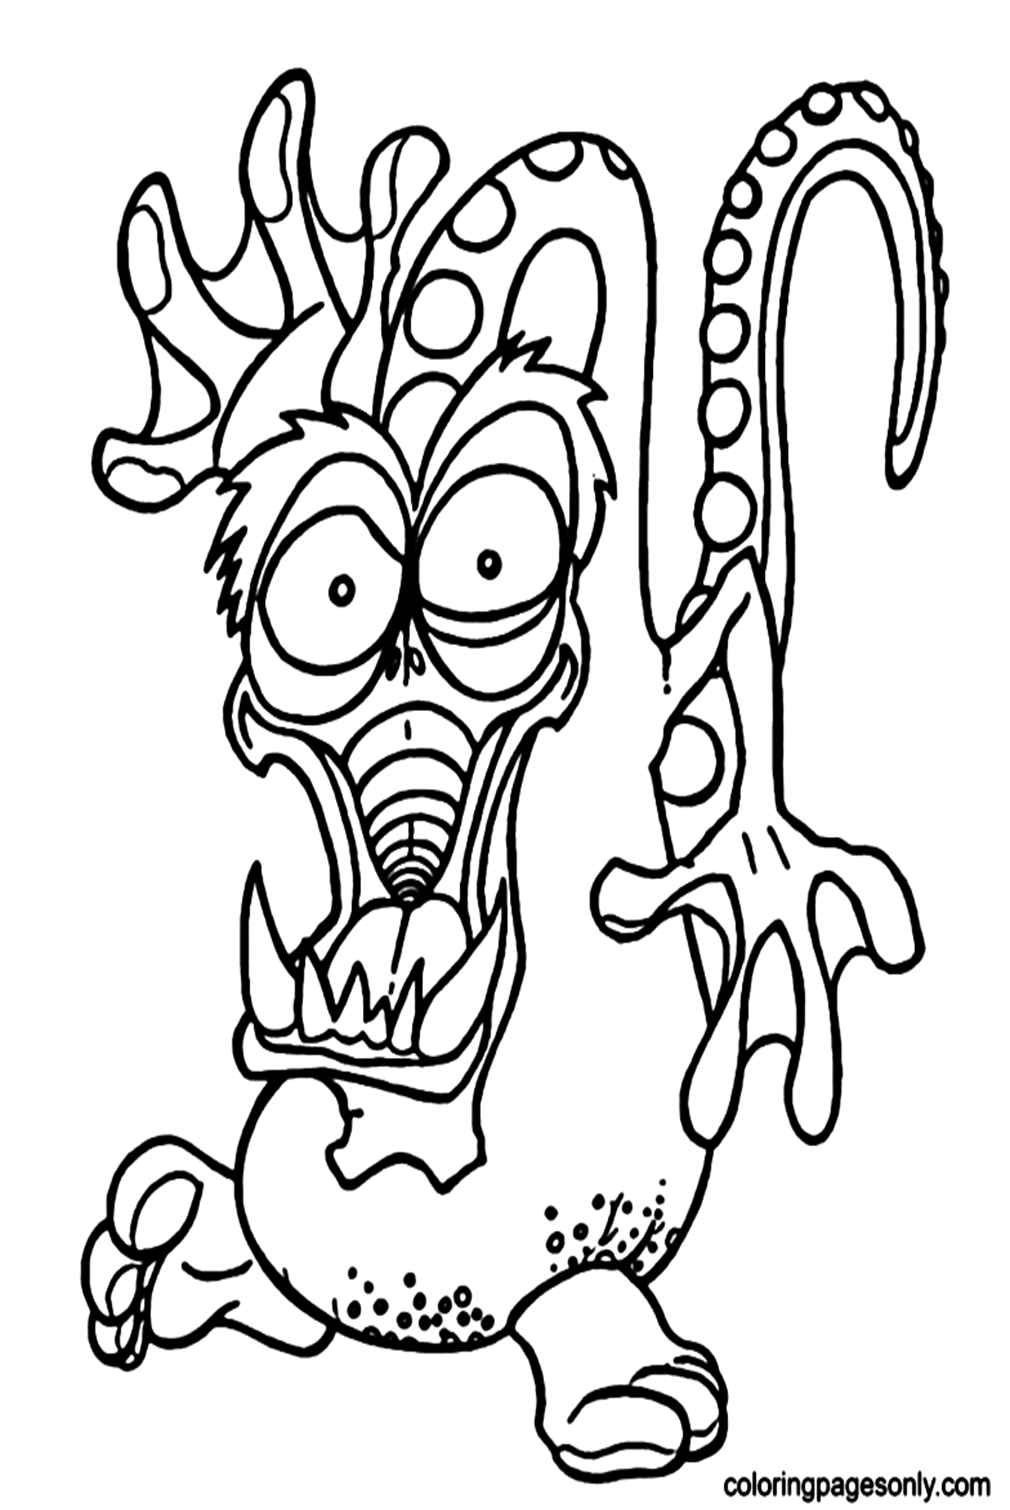 Monsters on Halloween Printable Coloring Pages